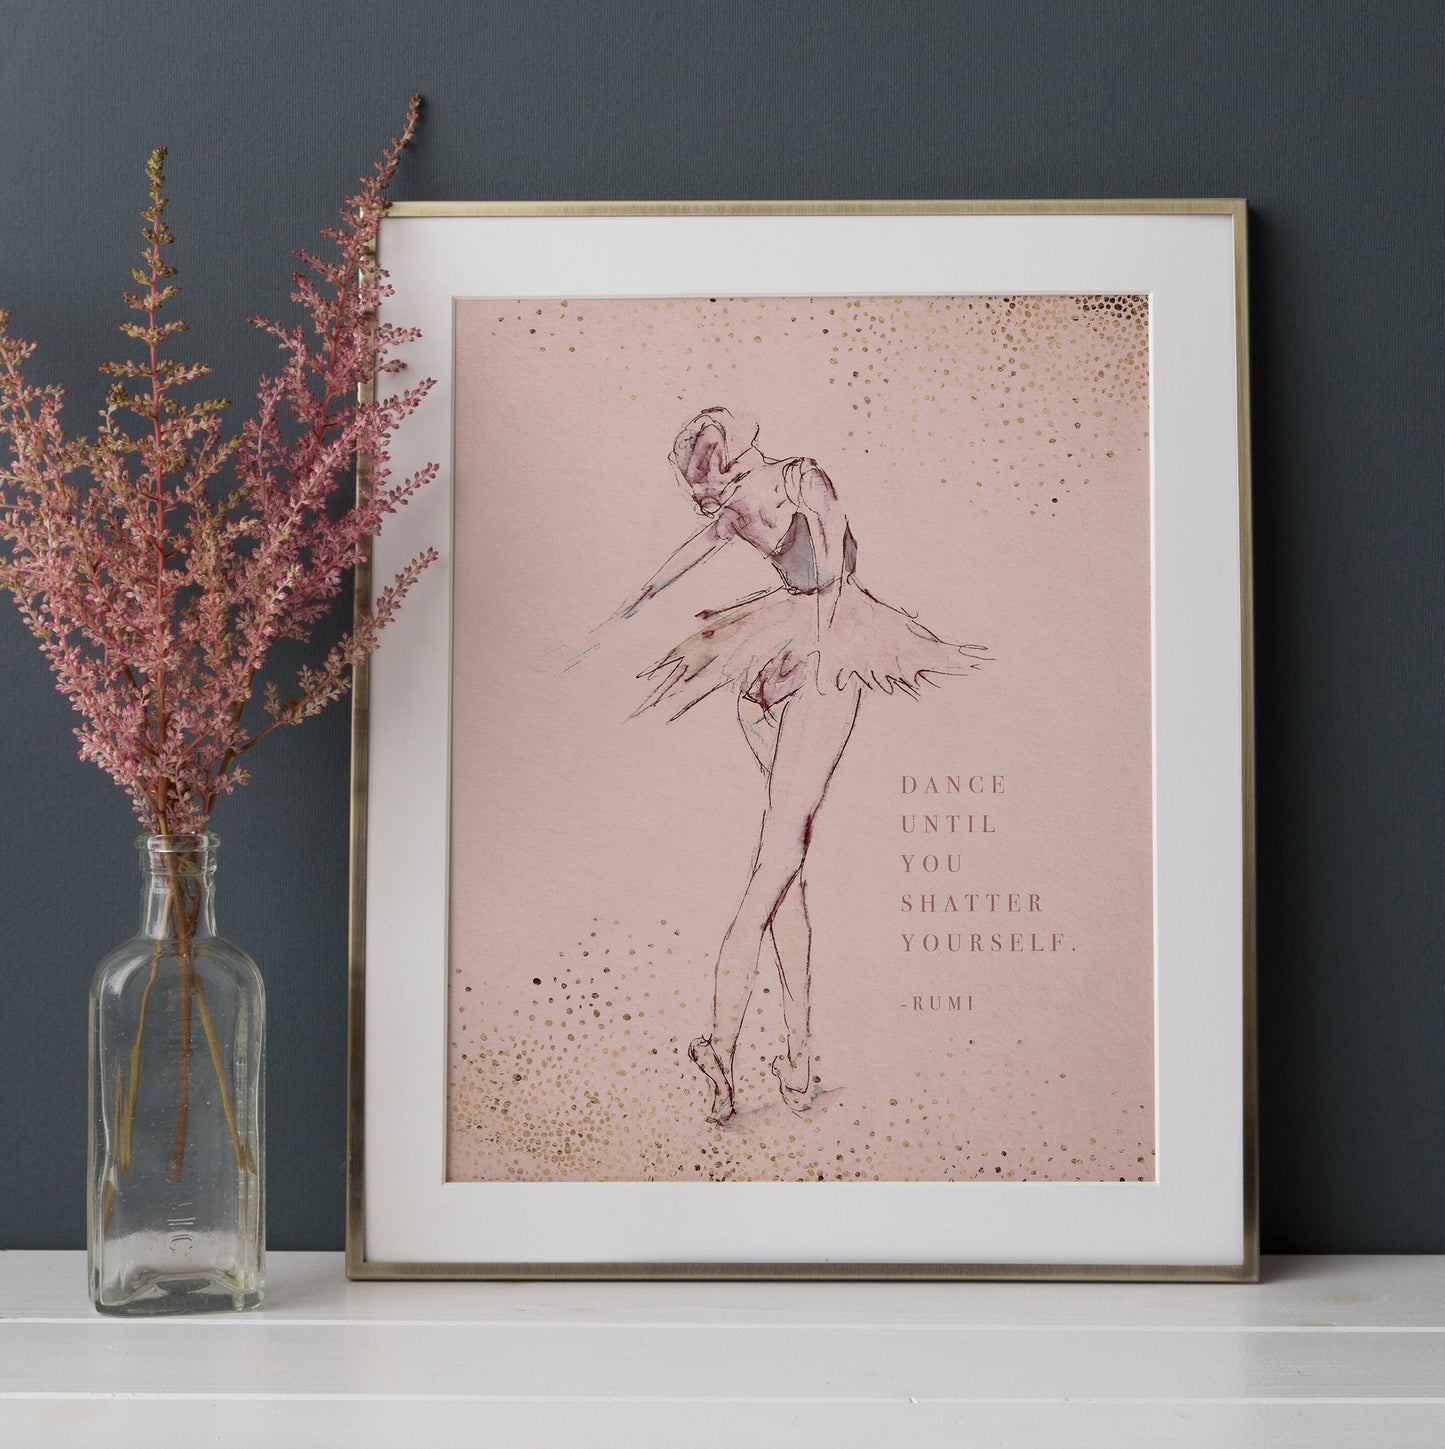 Ballet art featuring a quote by Rumi "Dance until you shatter yourself" Watercolor Ballerina Art, Gift for Dancer